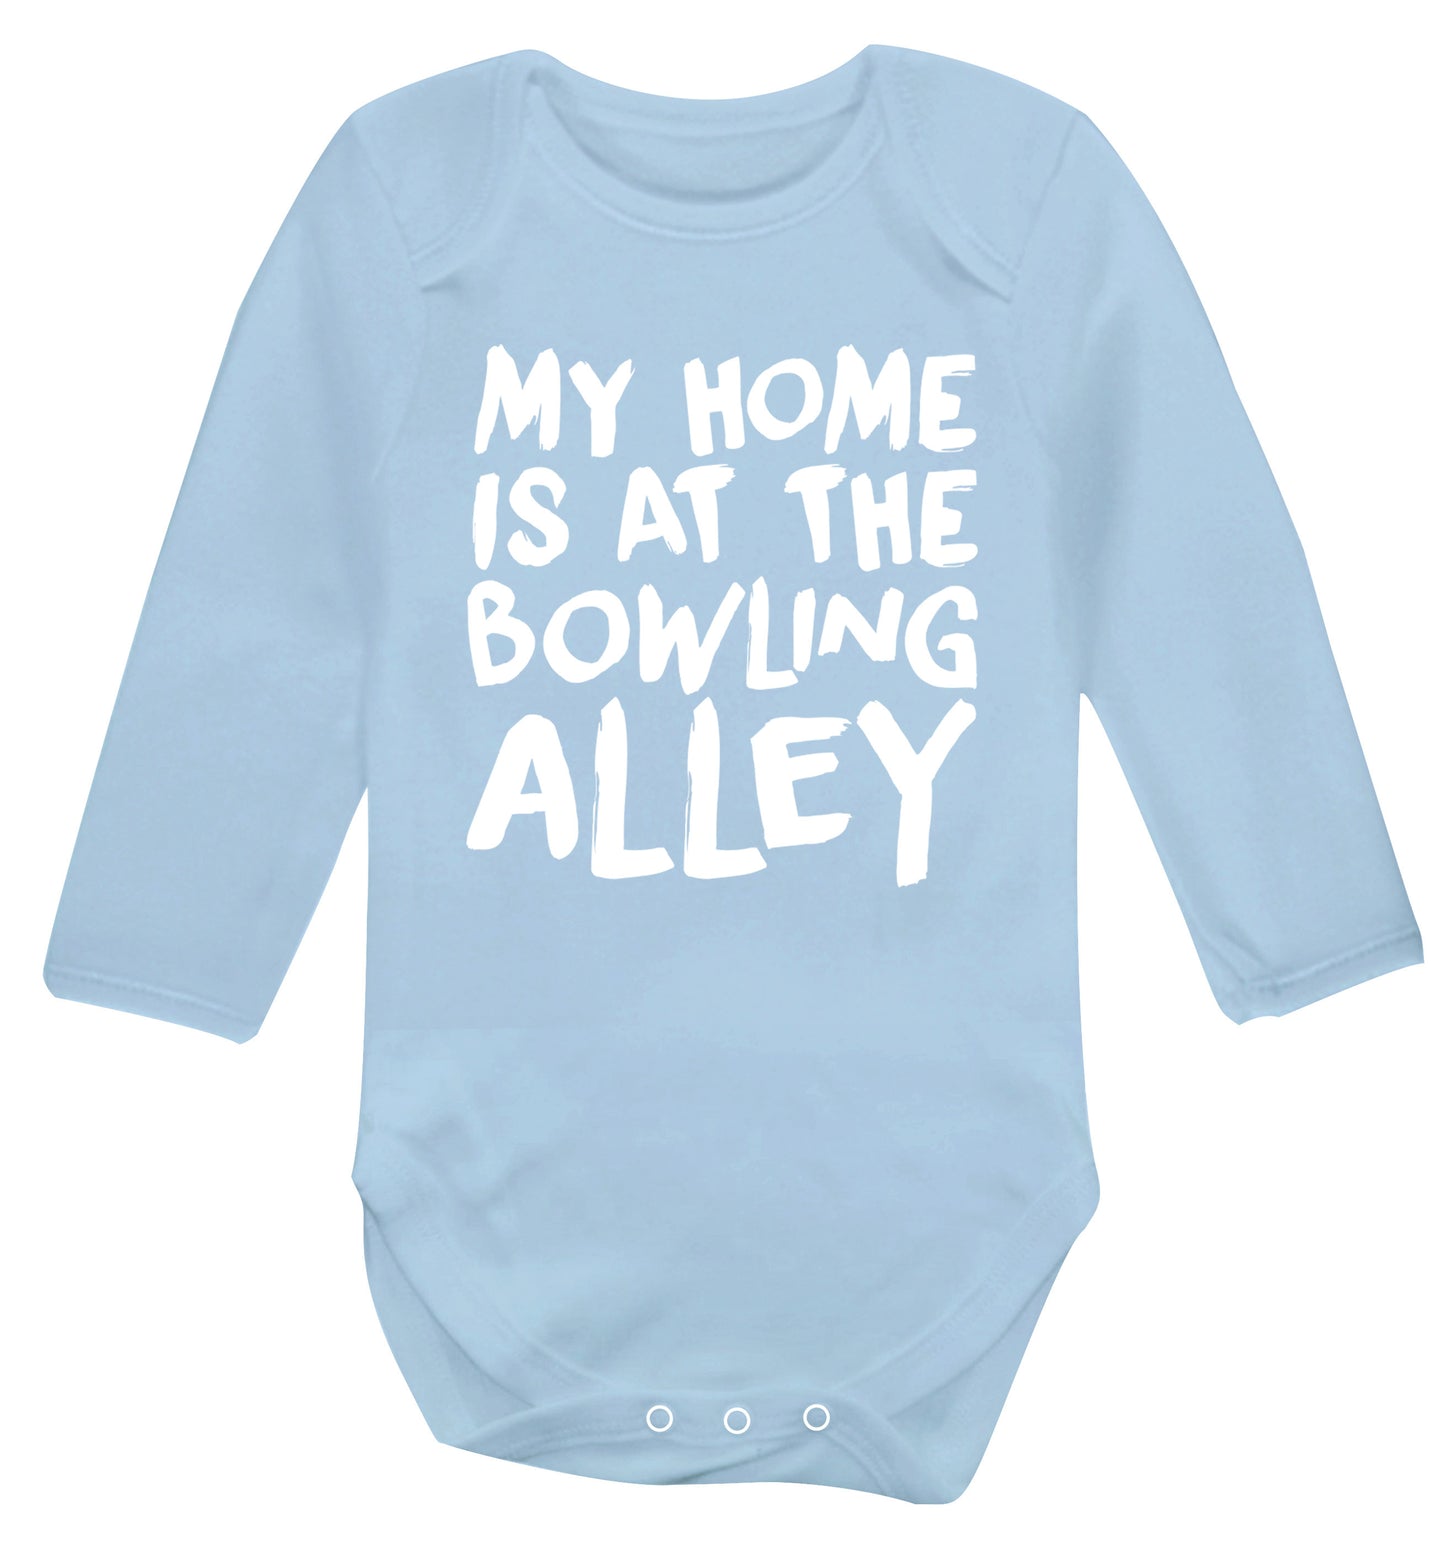 My home is at the bowling alley Baby Vest long sleeved pale blue 6-12 months